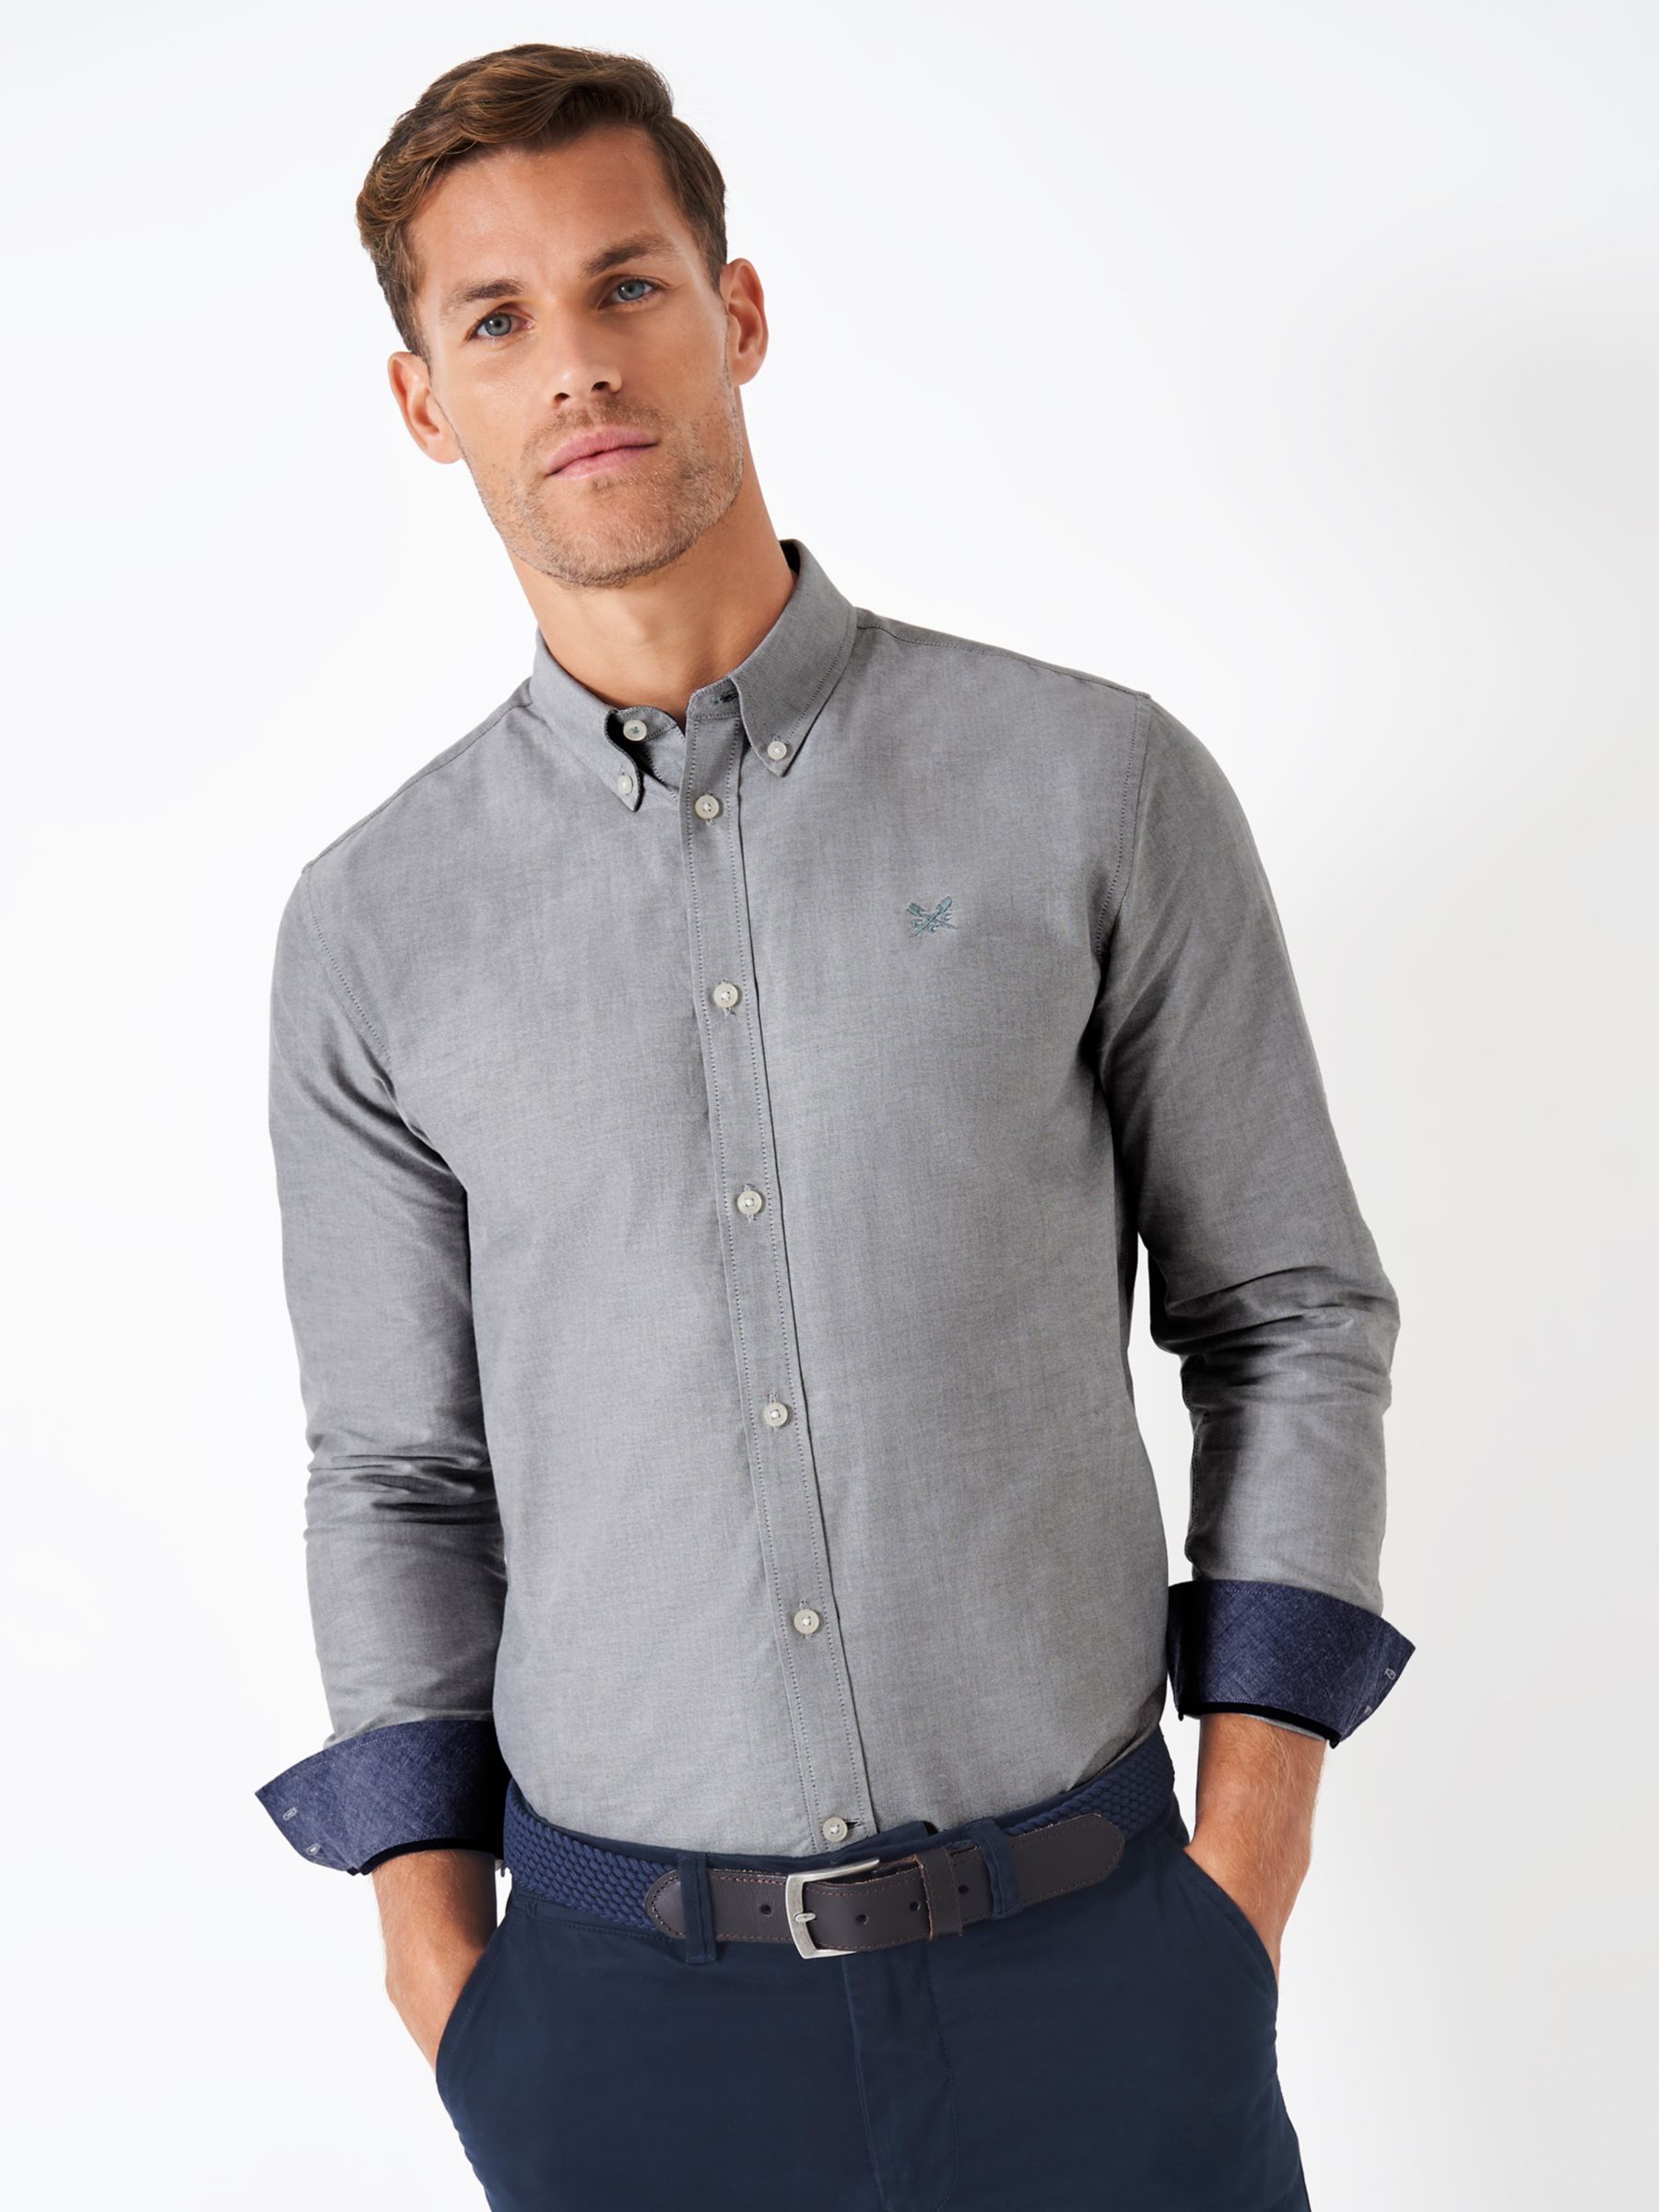 Crew Clothing Classic Fit Oxford Shirt, Light Grey at John Lewis & Partners